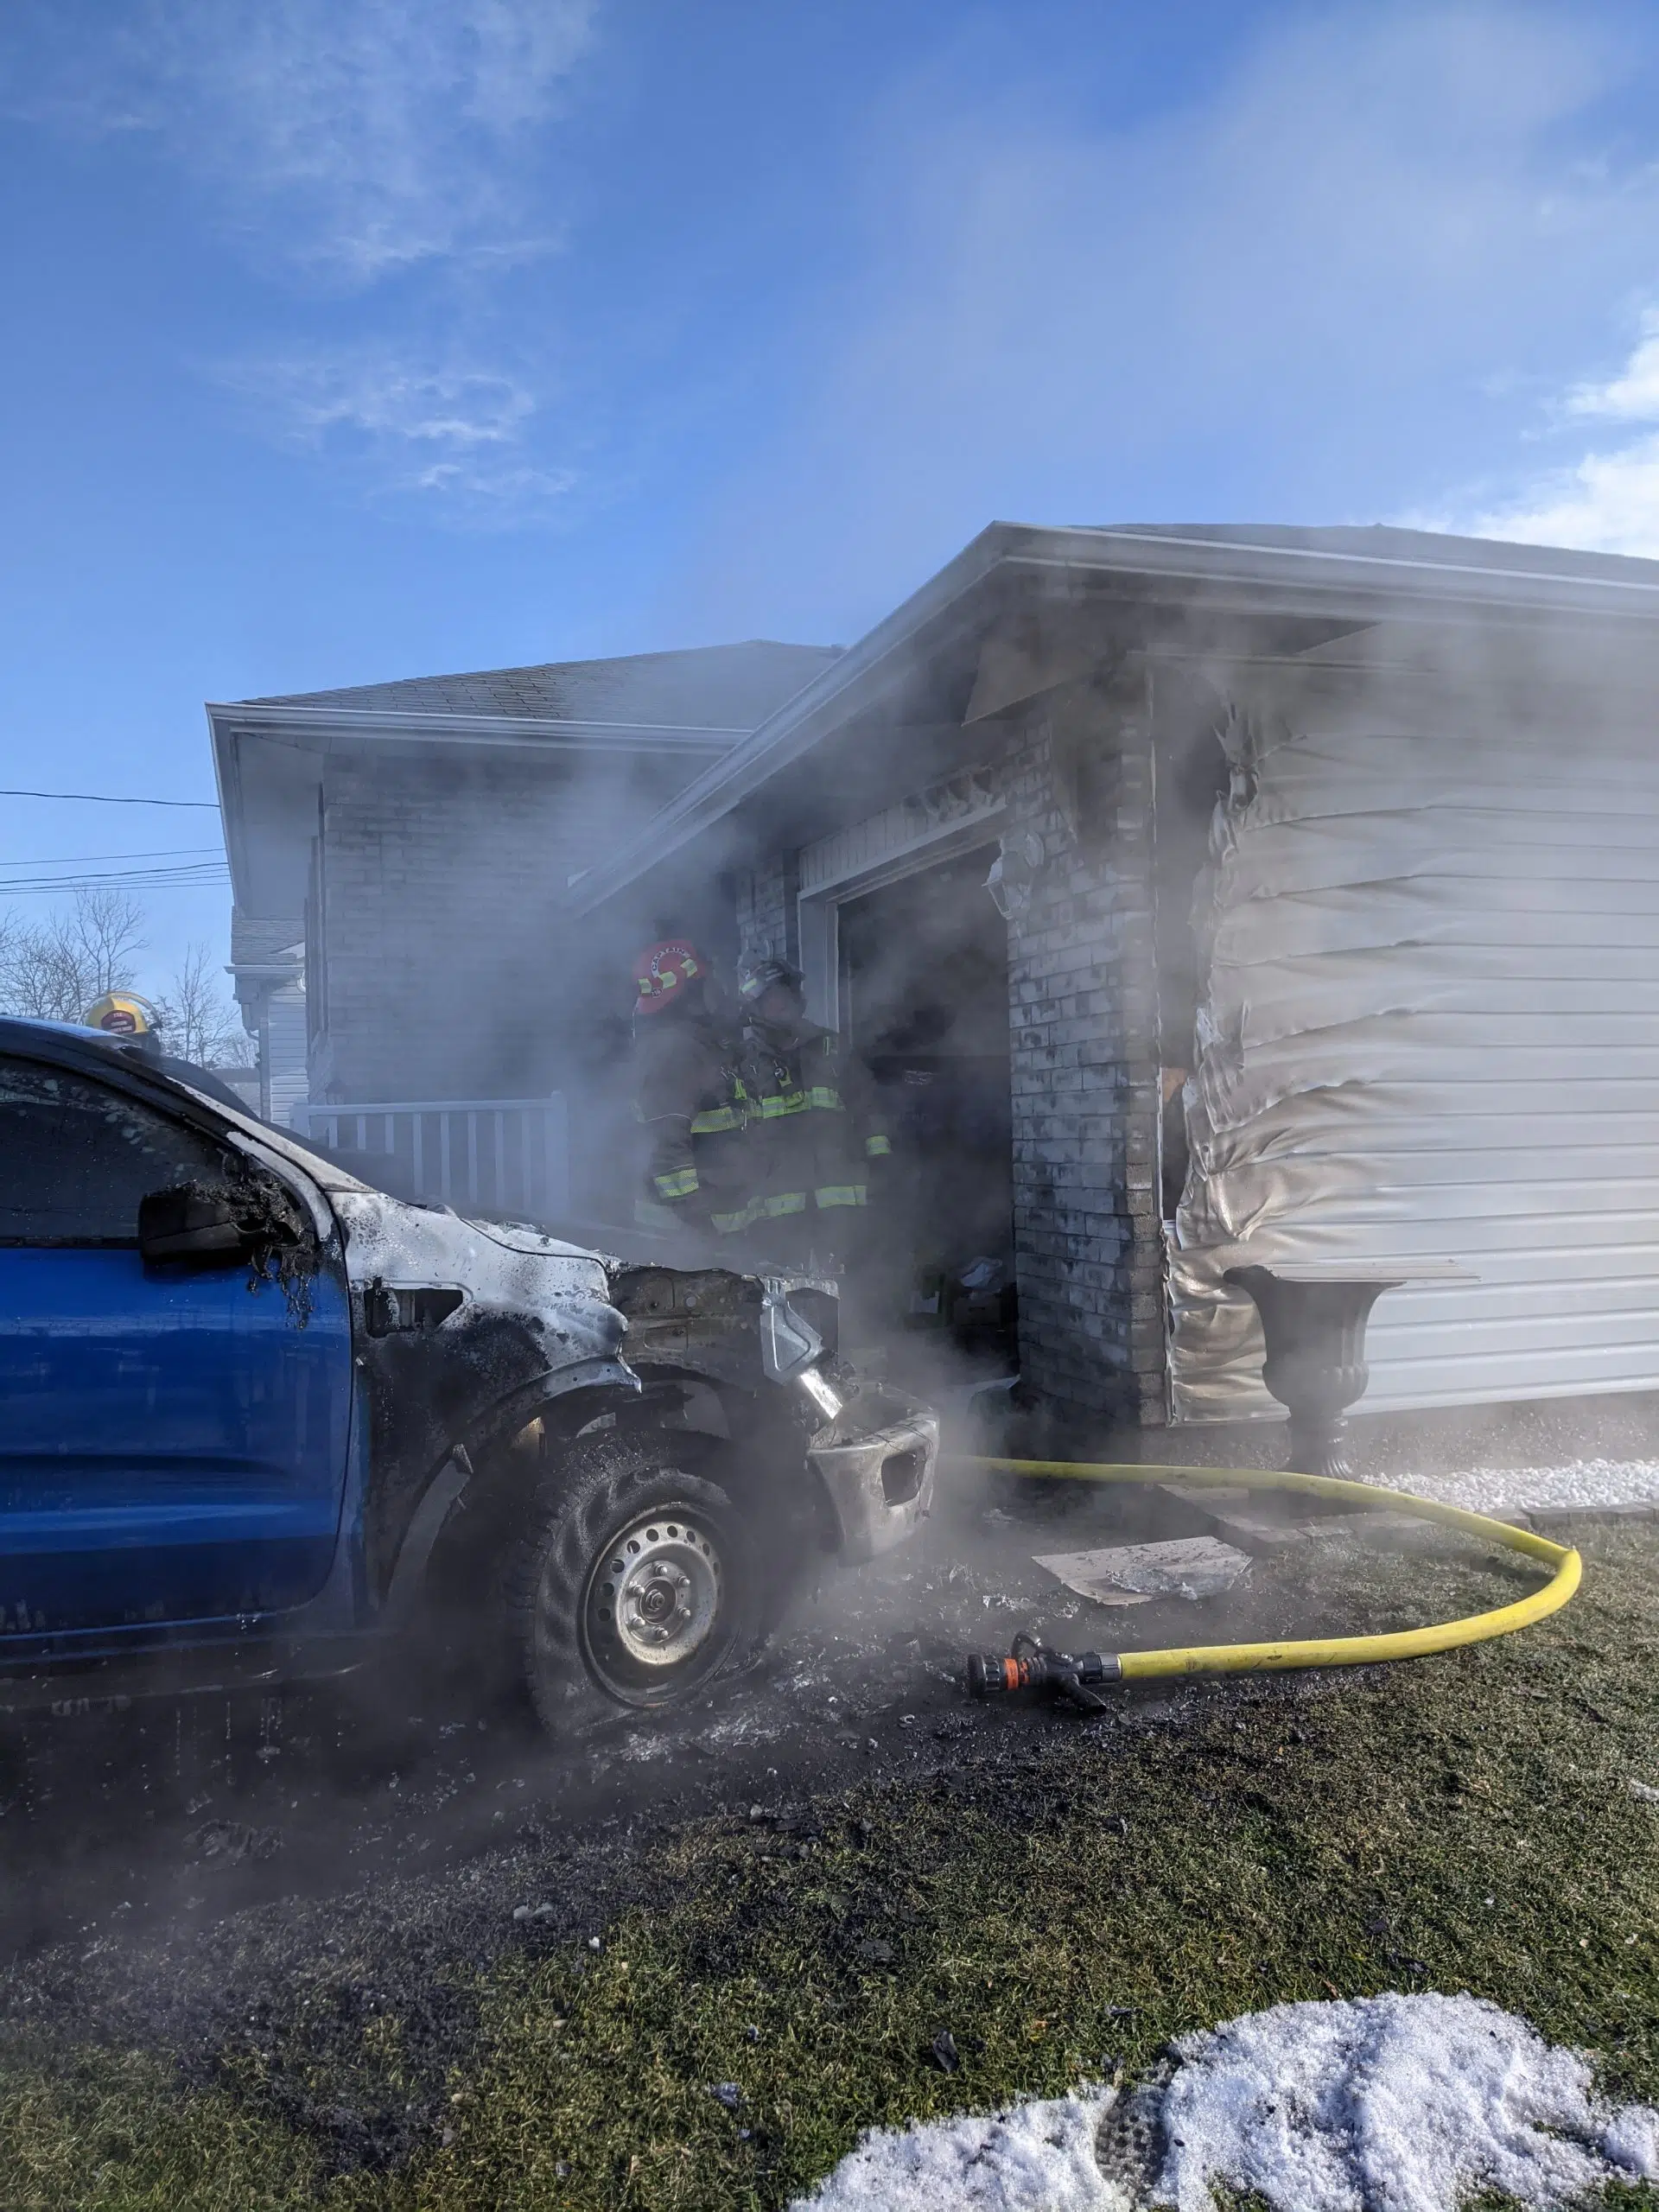 Firefighters tackle truck fire